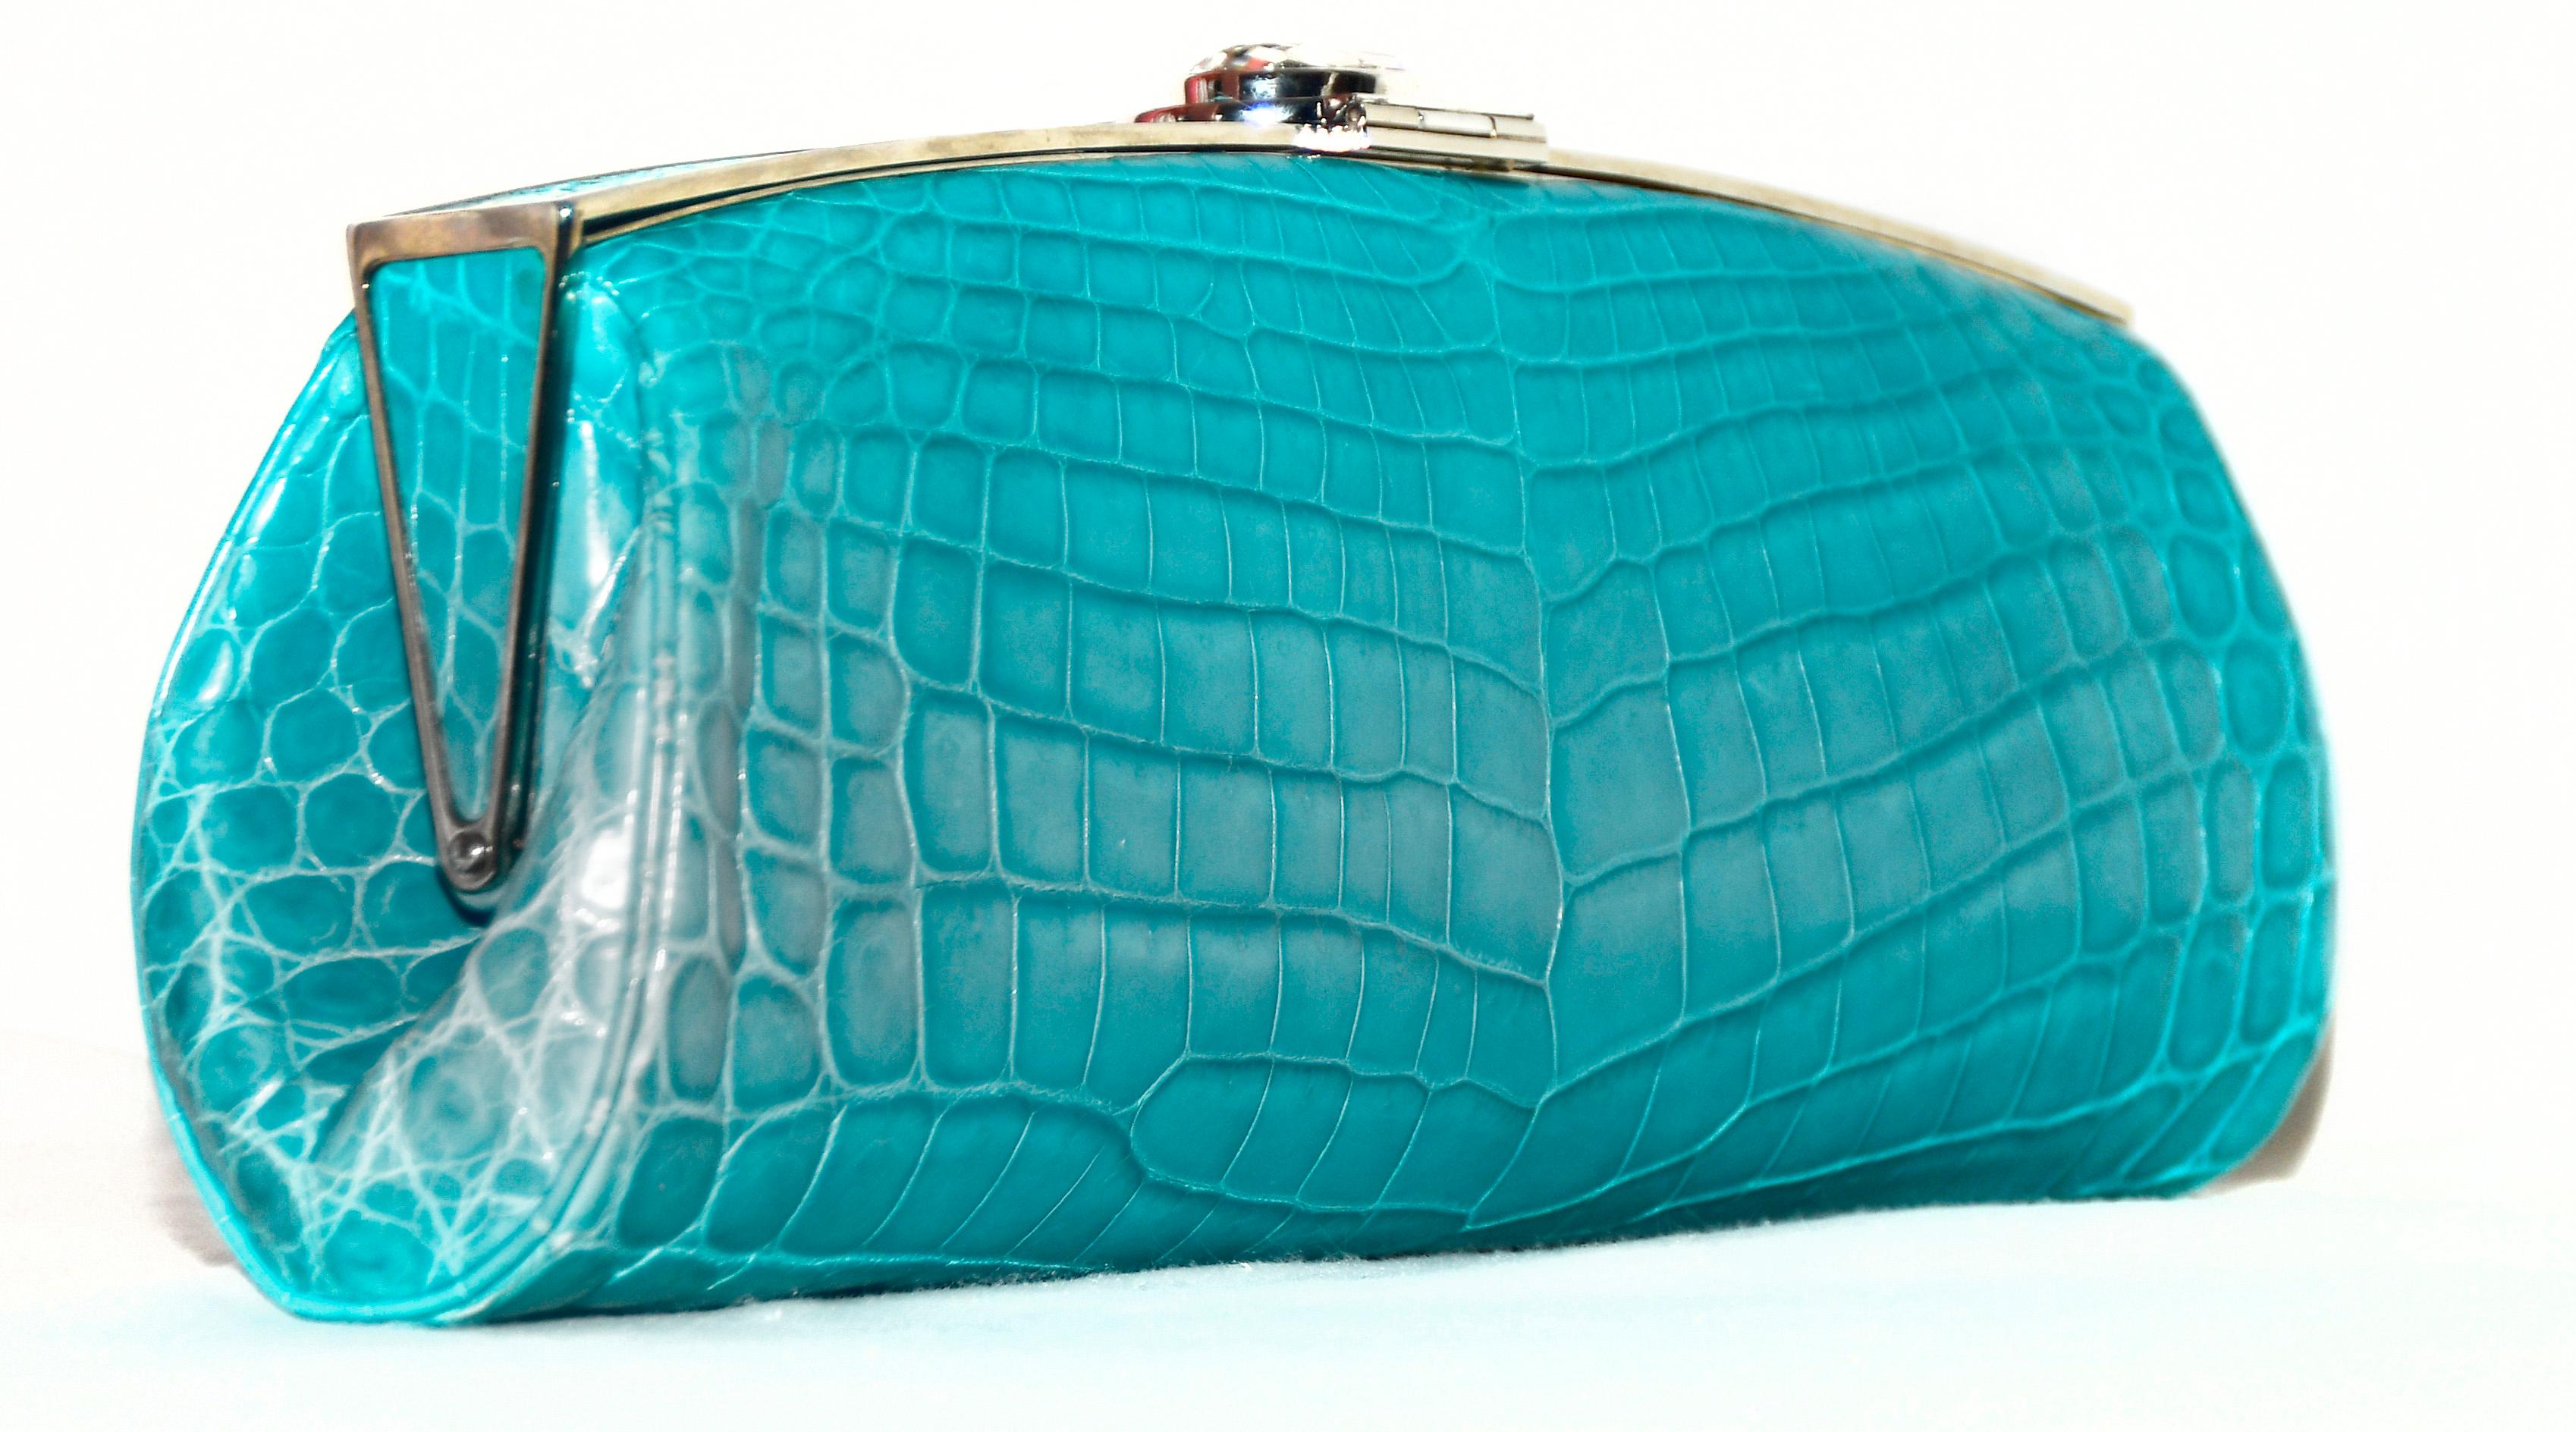 Blue Judith Leiber Turquoise Croc Clutch With Crystal Top Closure For Sale